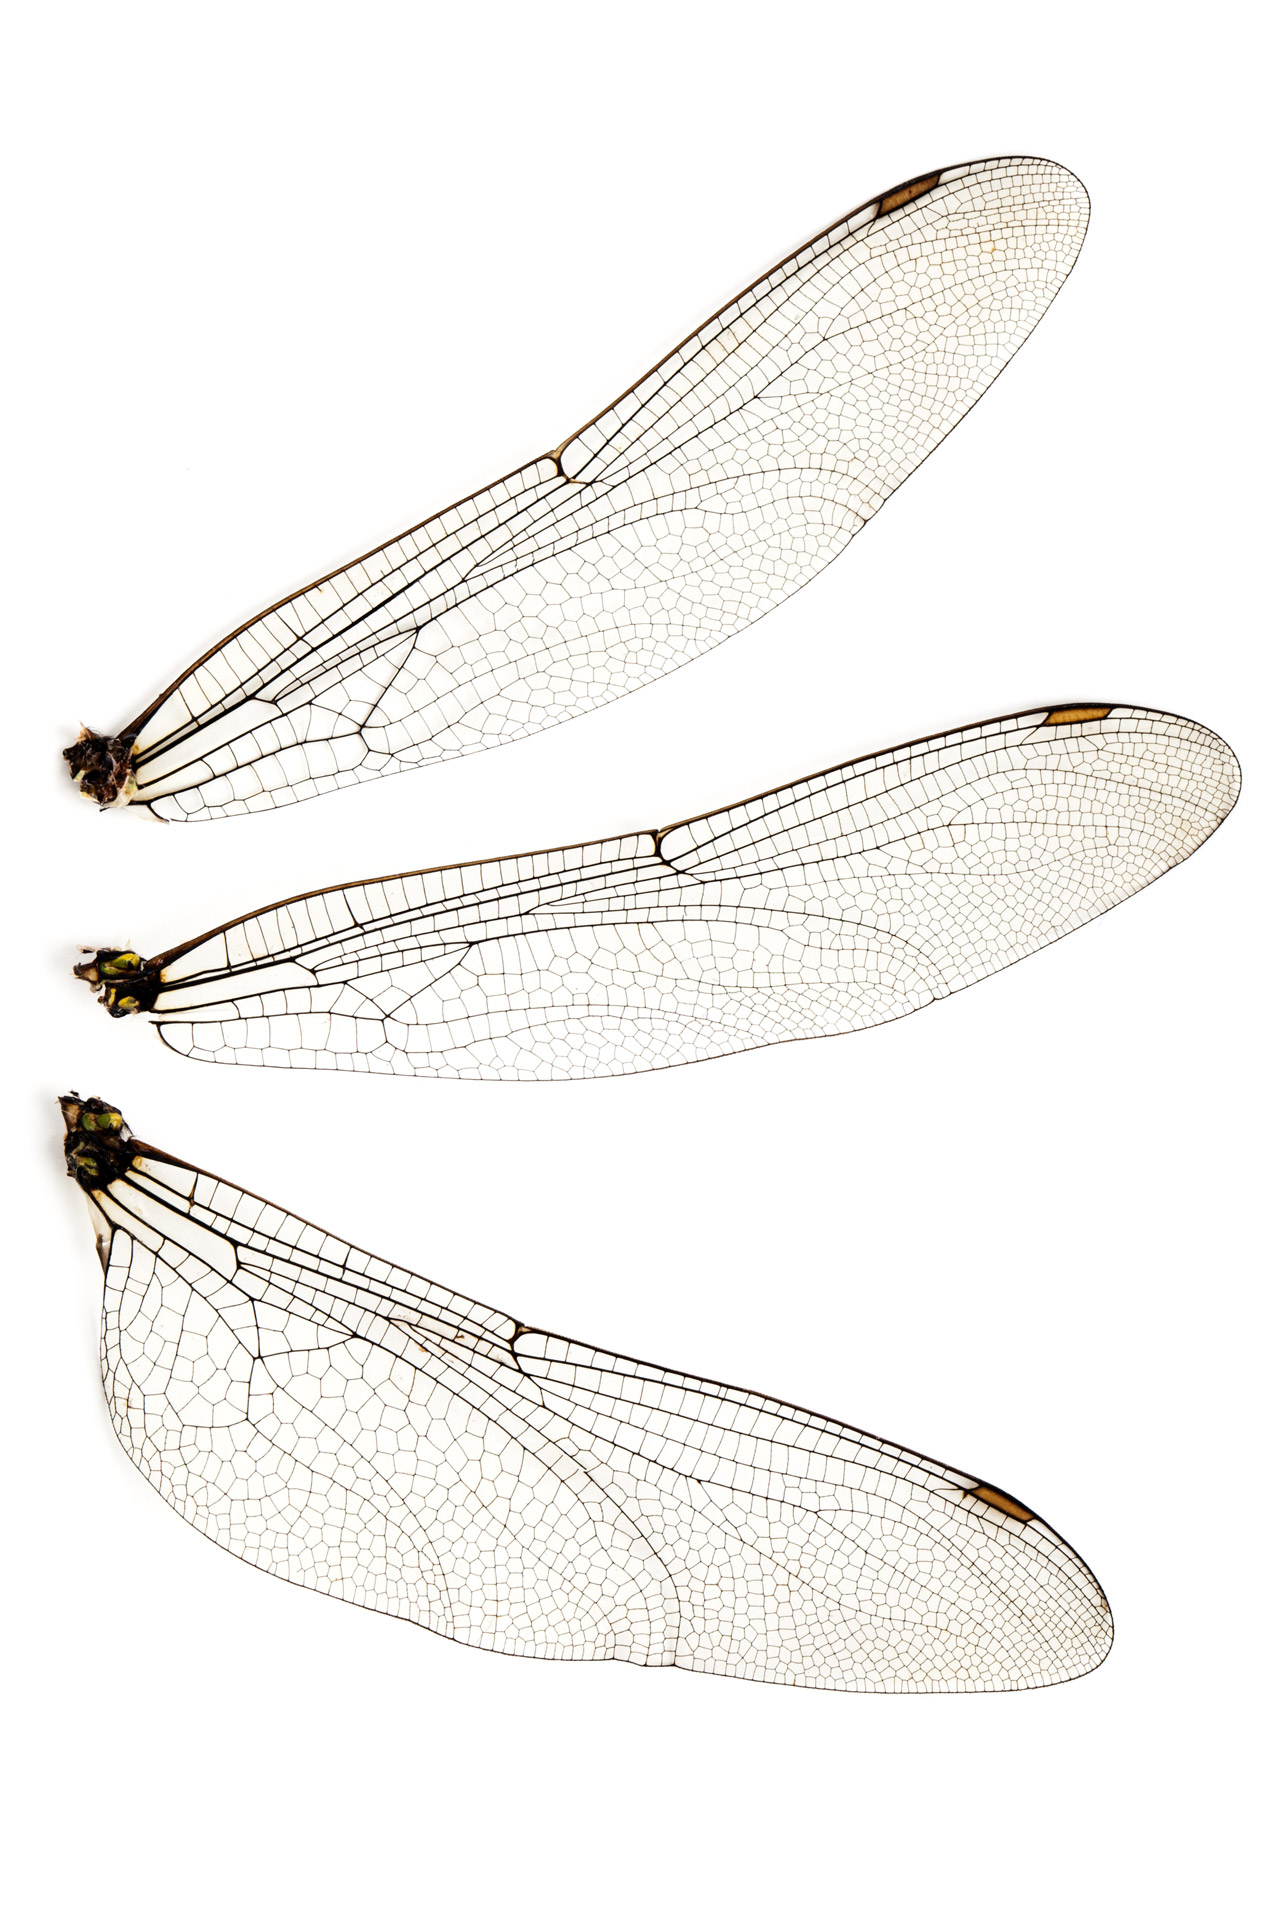 dry dragonfly wings isolated on white background. Ready for your photomontage projects